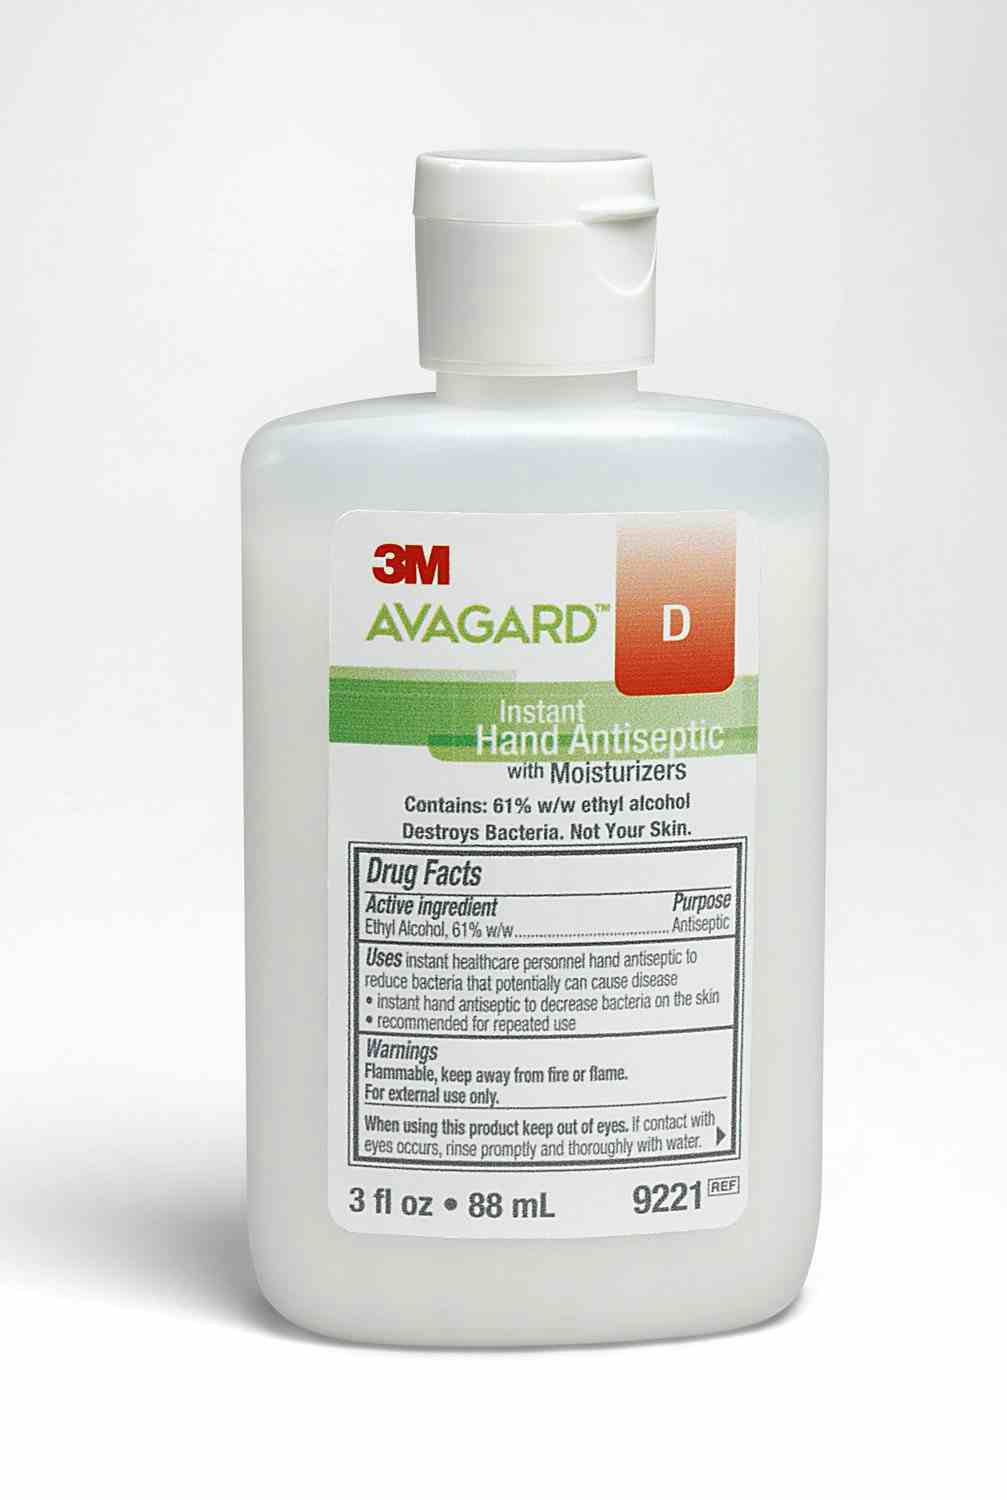 3M Avagard Instant Hand Antiseptic with Moisturizers, 3 oz., 9221, 1 Bottle